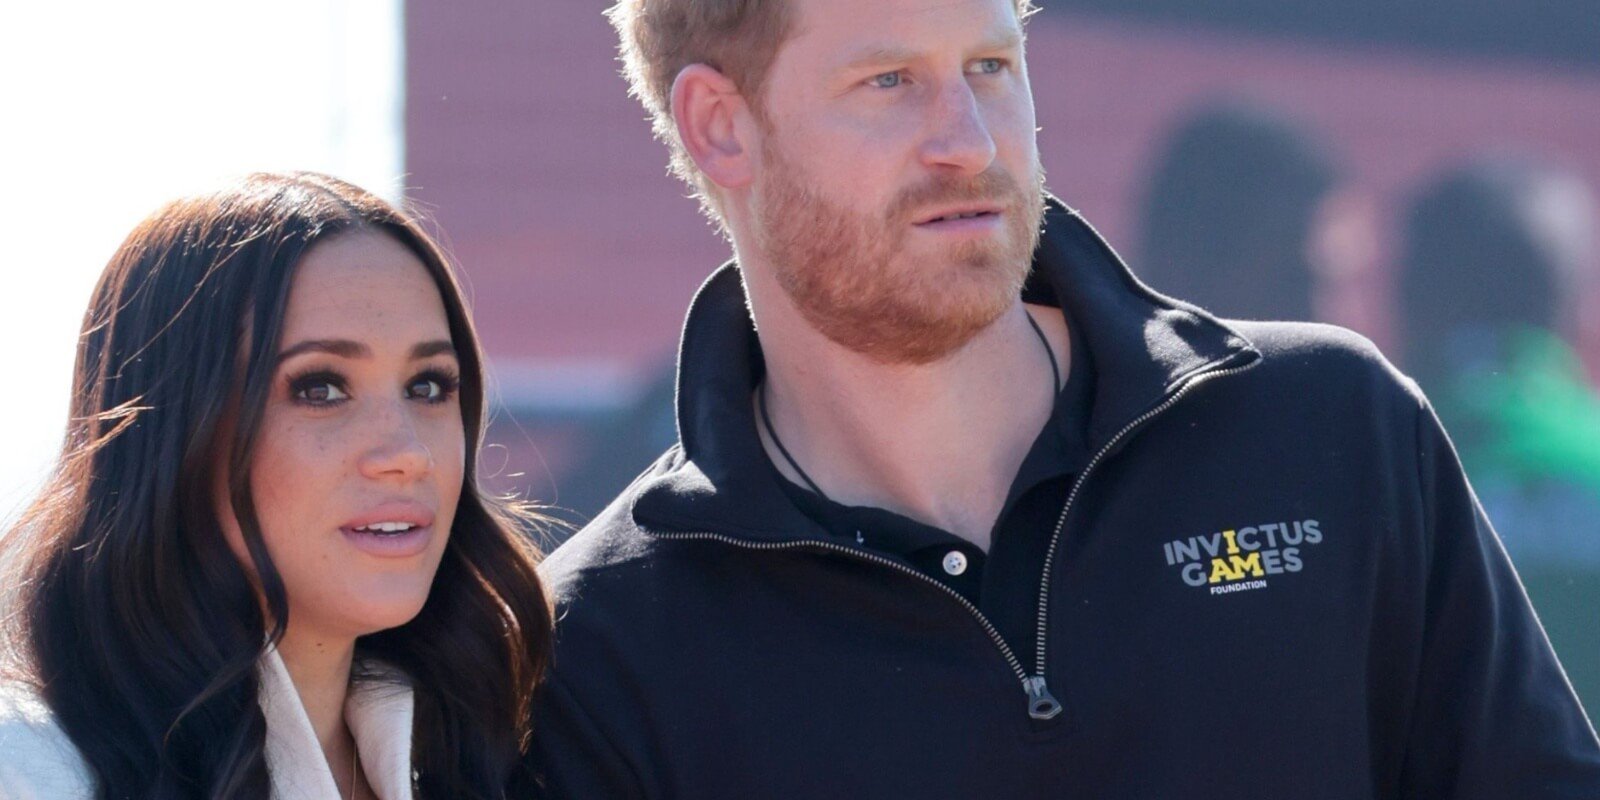 Meghan Markle and Prince Harry are photographed at the Invictus Games The Hague 2020 at Zuiderpark on April 17, 2022 in The Hague, Netherlands.